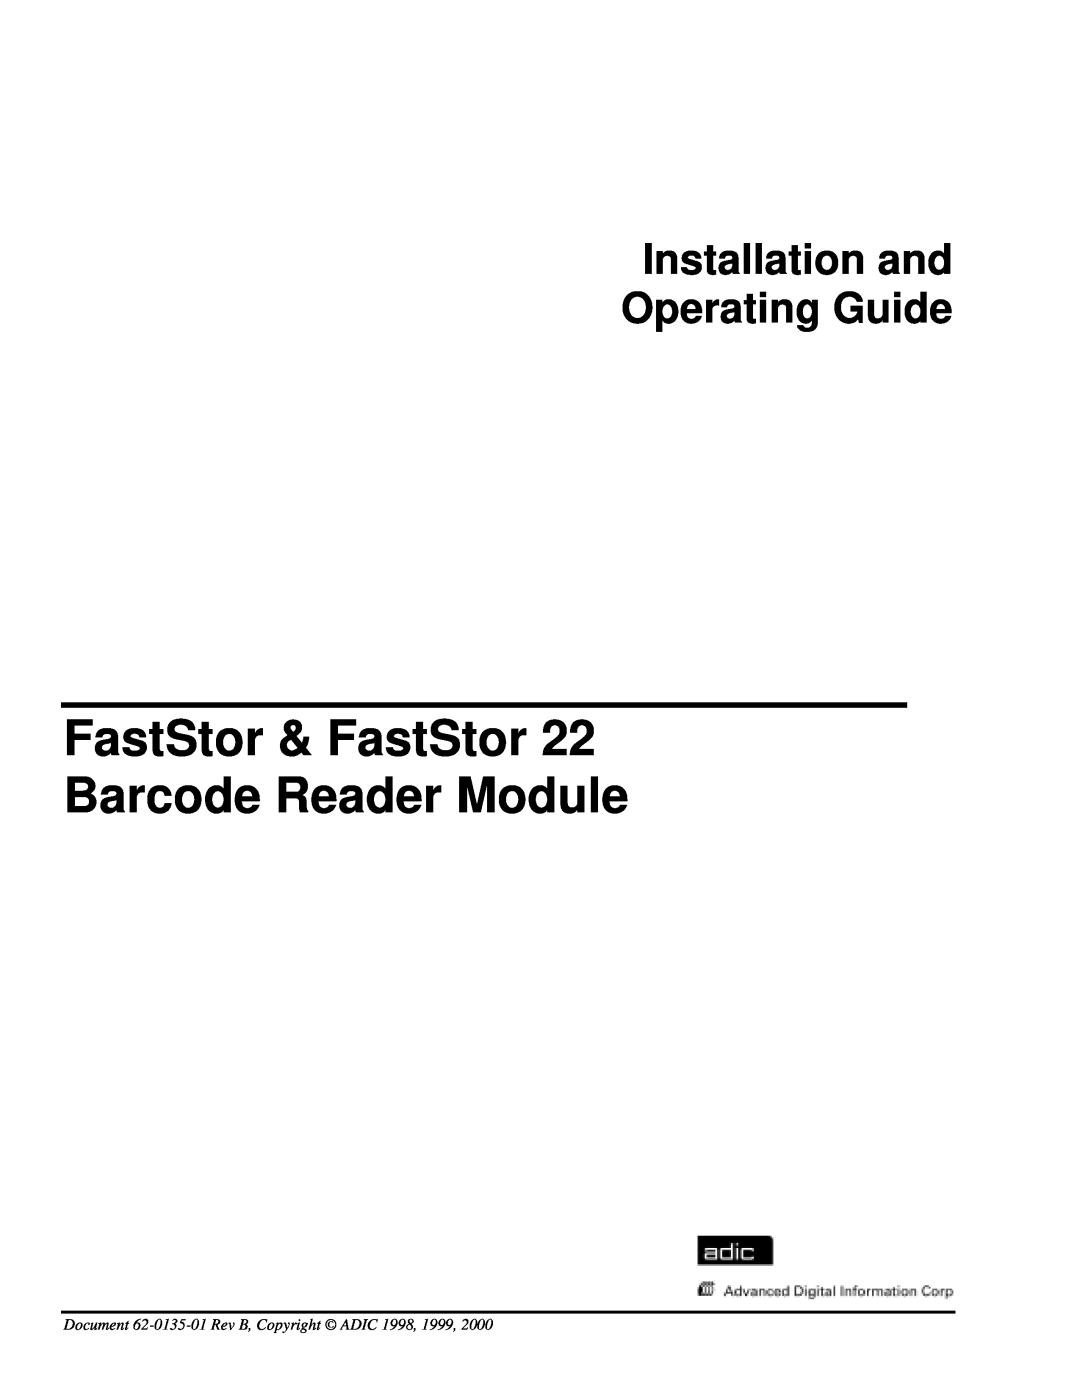 ADIC 22 manual FastStor & FastStor Barcode Reader Module, Installation and Operating Guide 